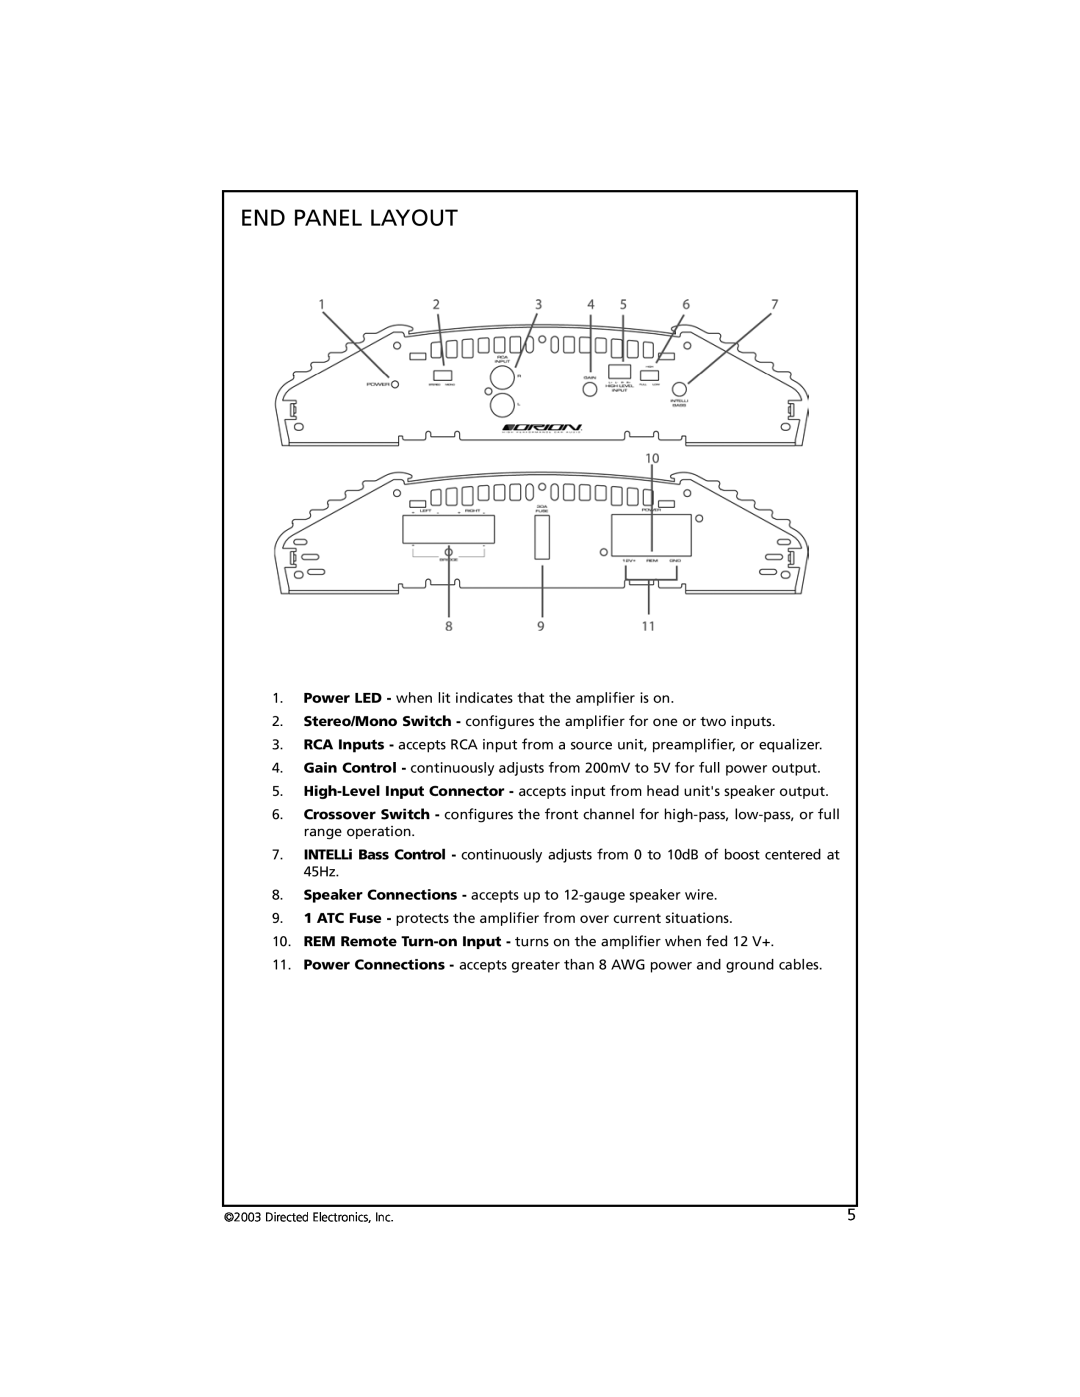 Orion Car Audio 3002, 2002 manual End Panel Layout 